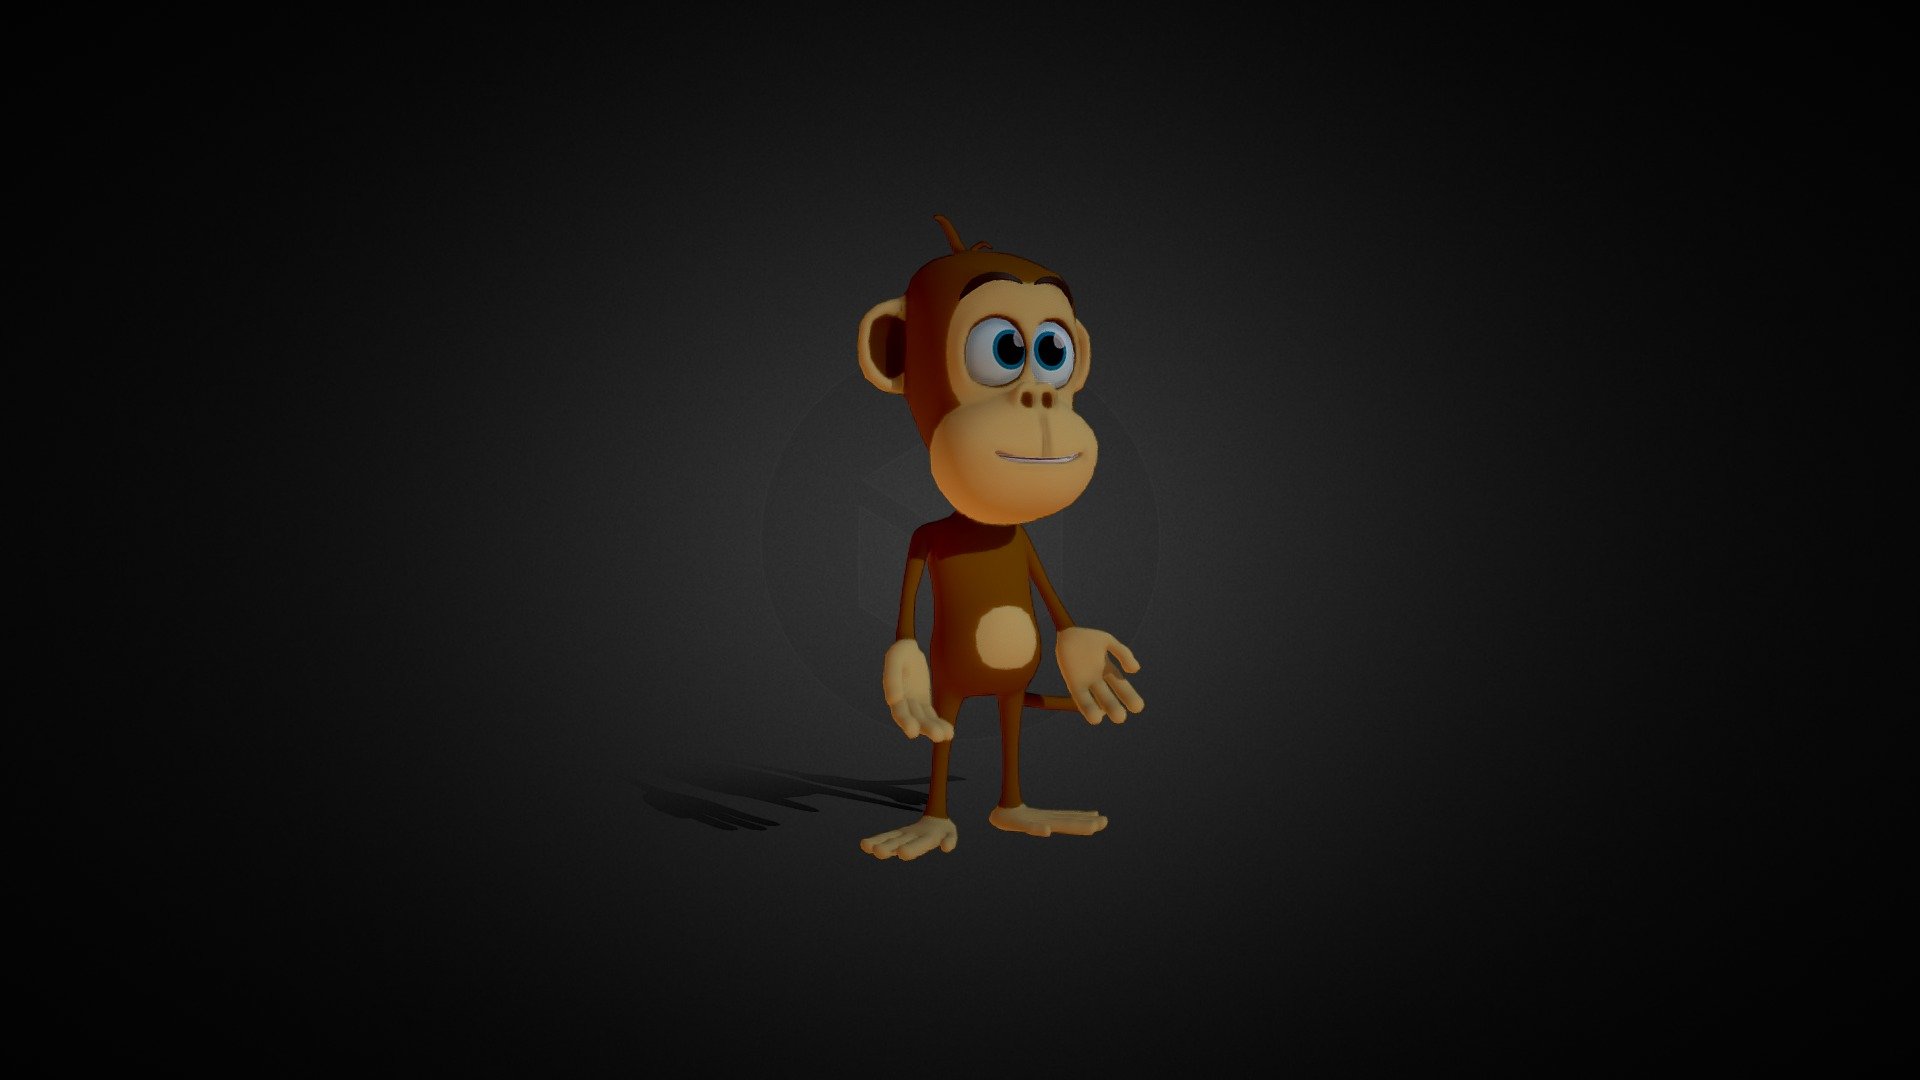 Detox designed ,modelt, rigged and animated this monkey for a AR app fot UMC (Childrens hospital in Holland) - UMC Monkey Animation - 3D model by Detox Animation (@DetoxAnimation) 3d model